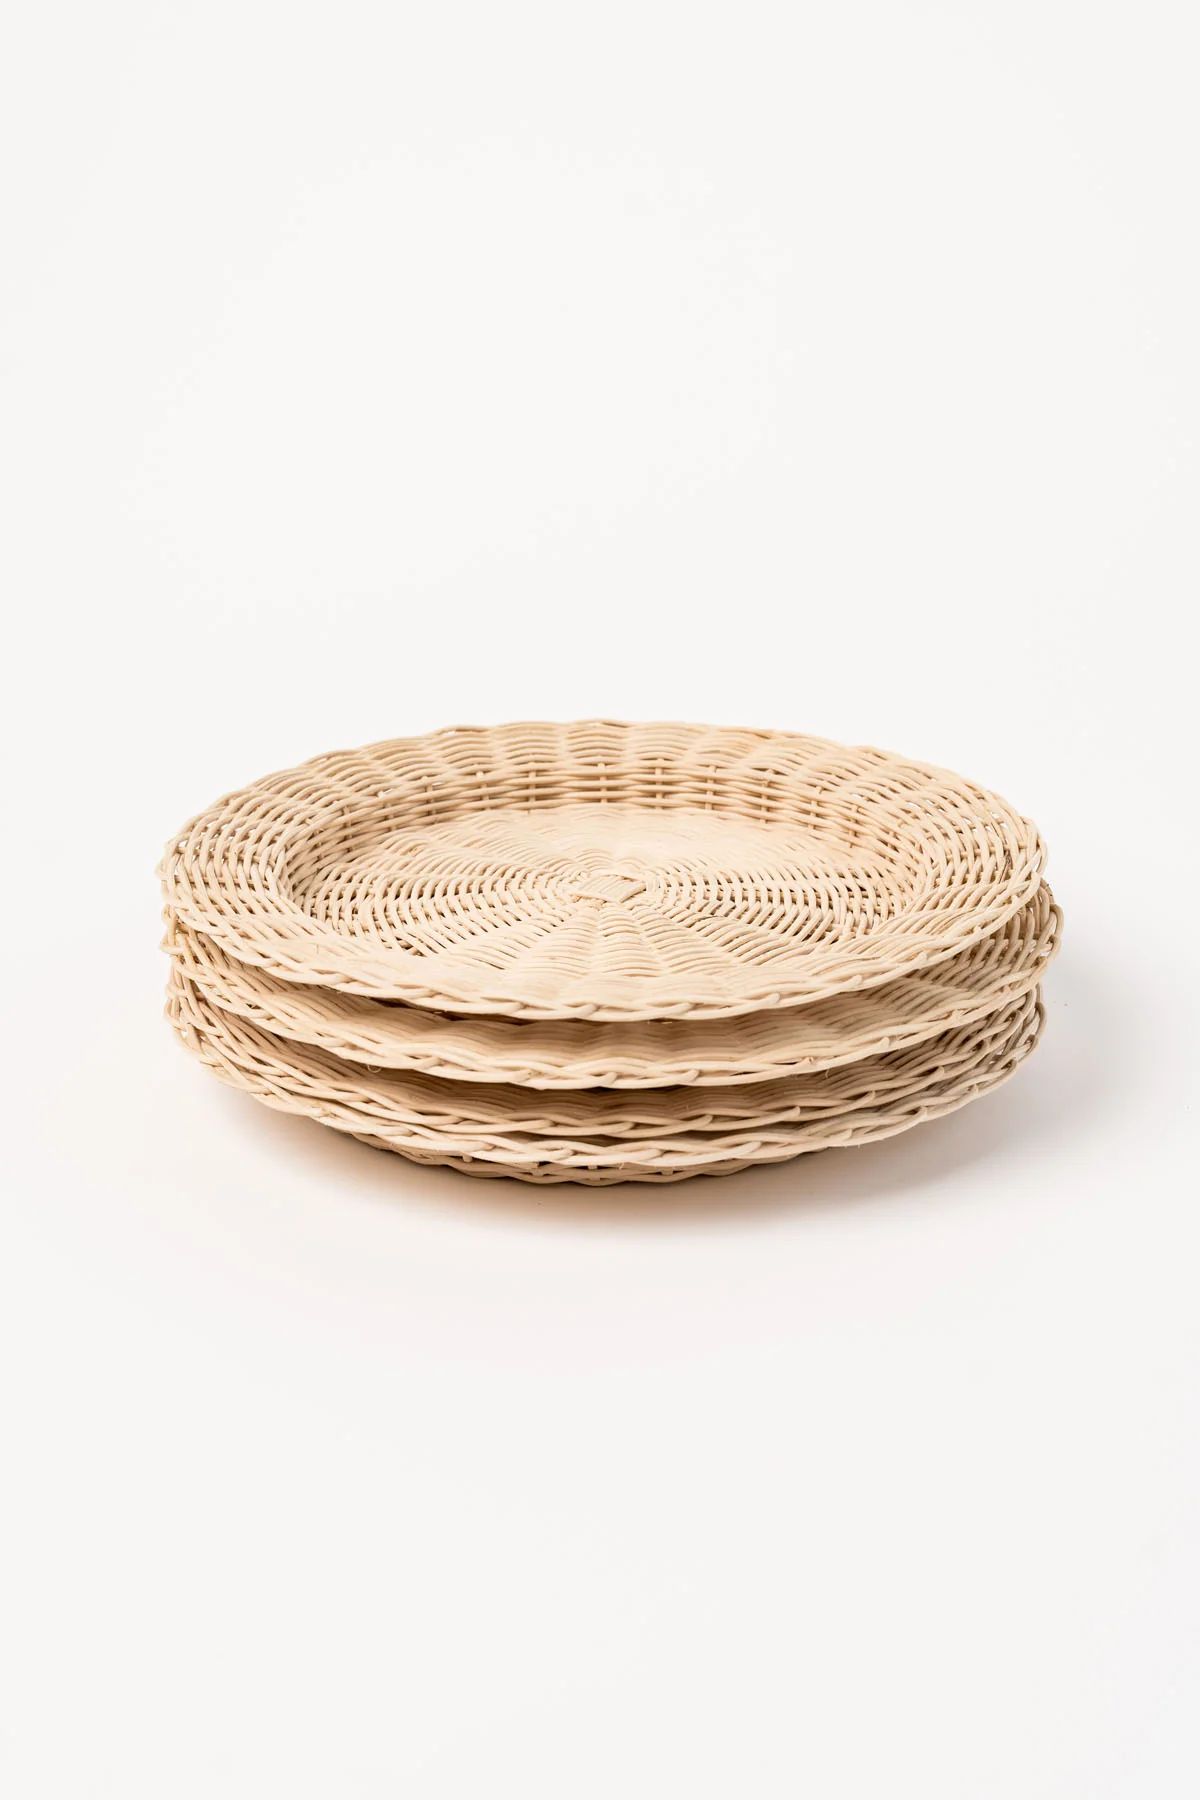 Wicker Charger Set x 4 - Natural | Rachel Parcell